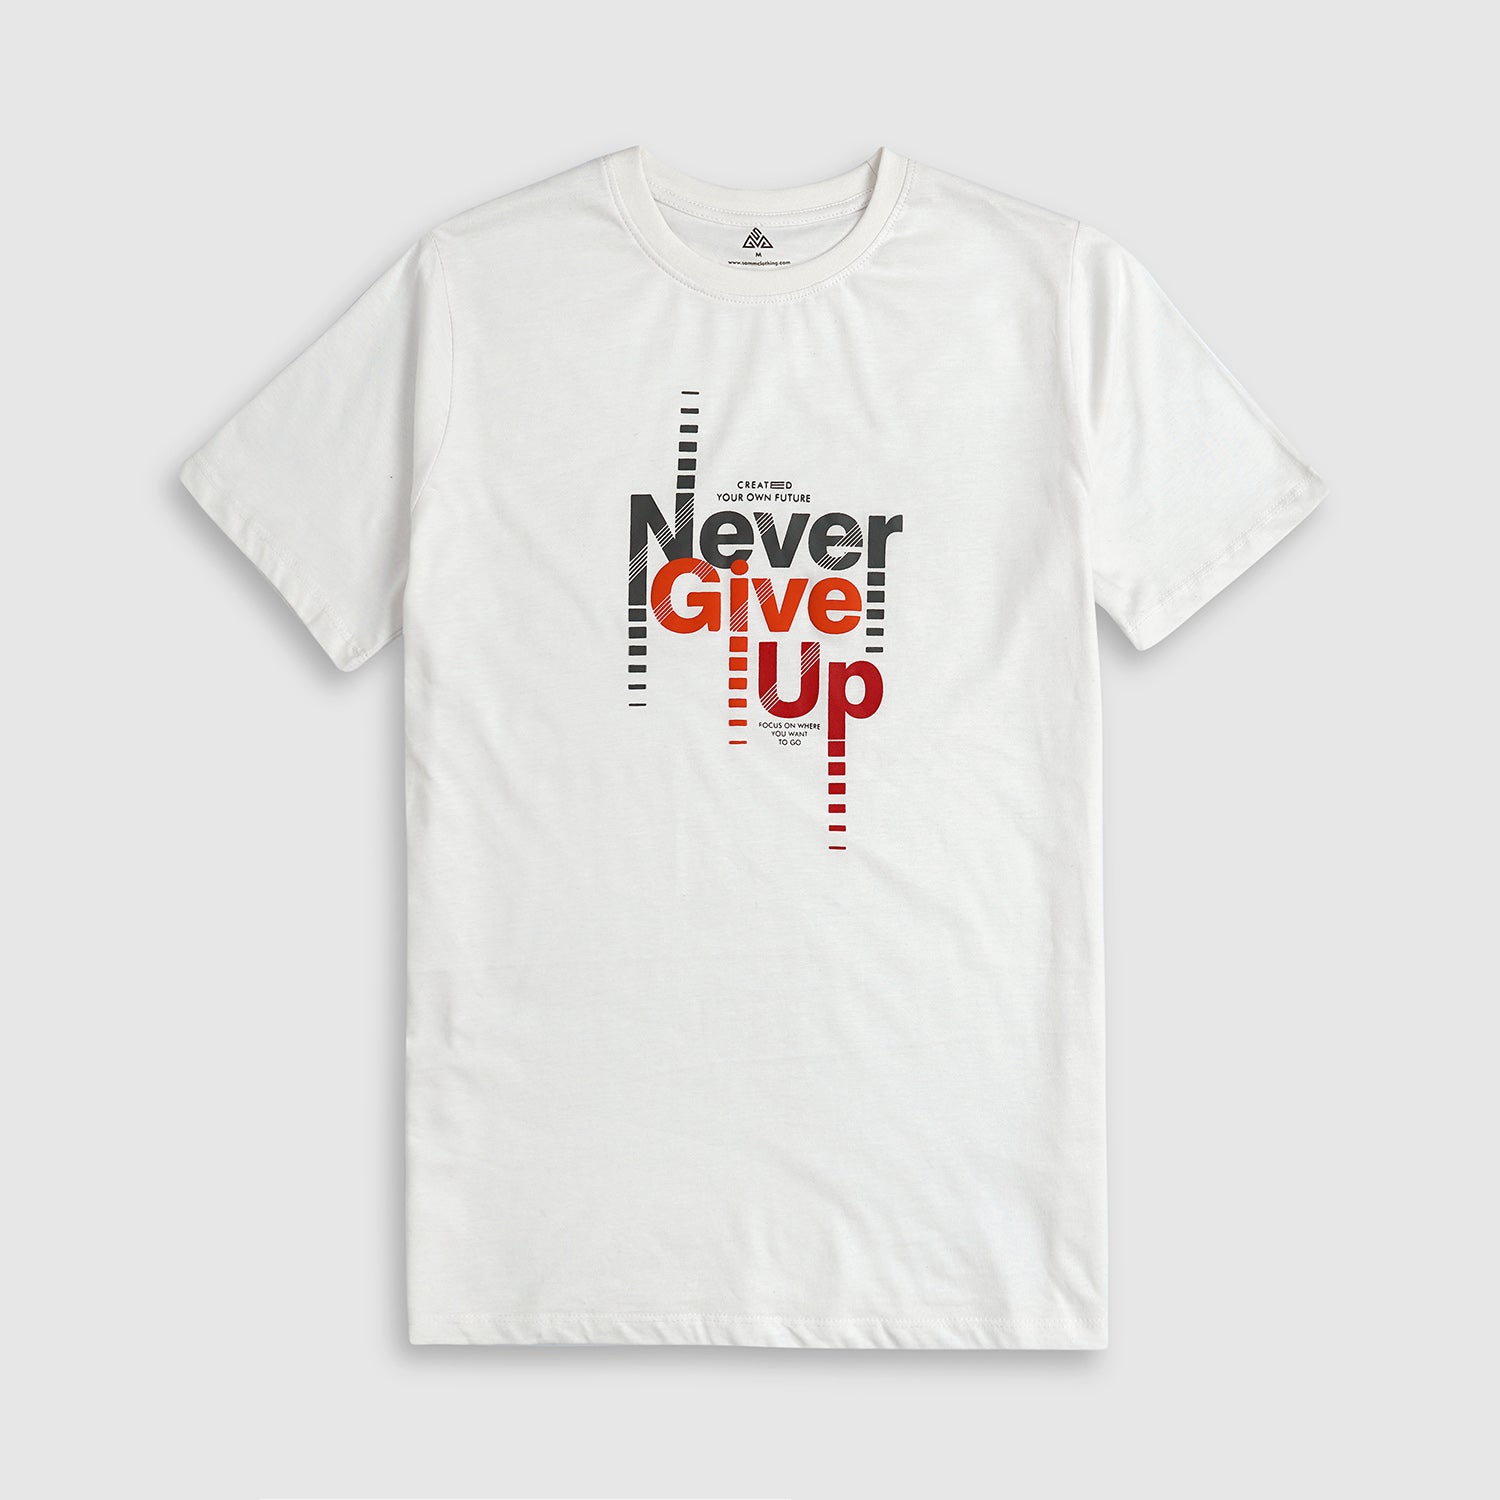 Pure Cotton " Never Give up" Graphic Tee Shirt for kids (7Yrs - 14 Yrs)